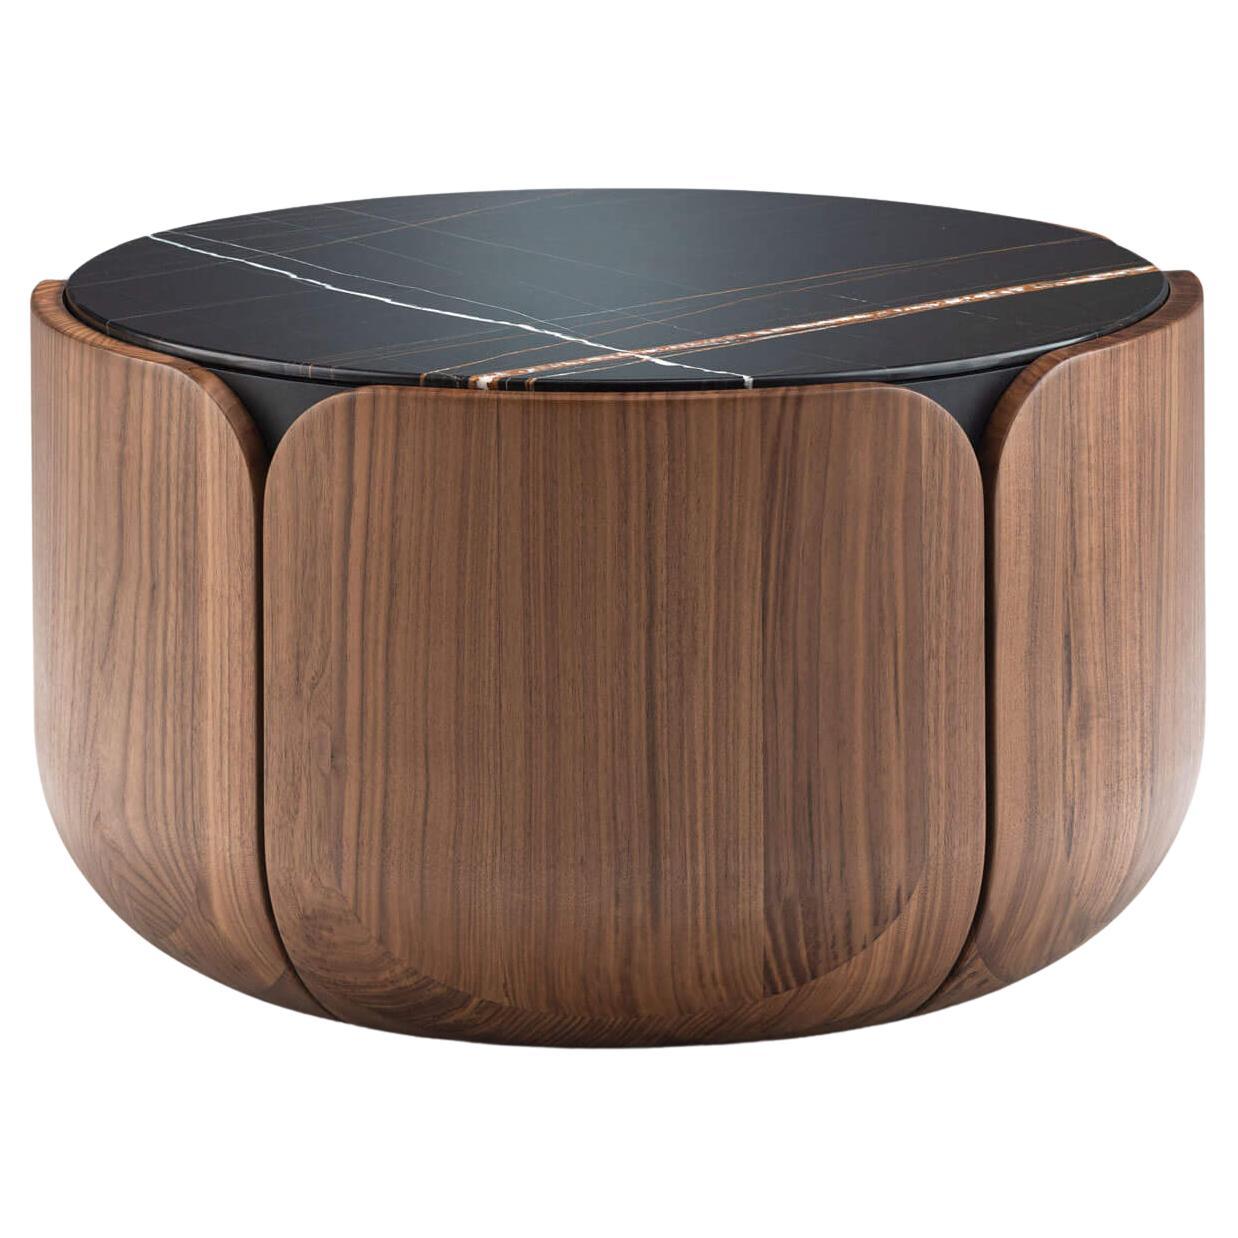 Cherry Sepia Sahara Noir Bloom Coffee Table M by Milla & Milli For Sale